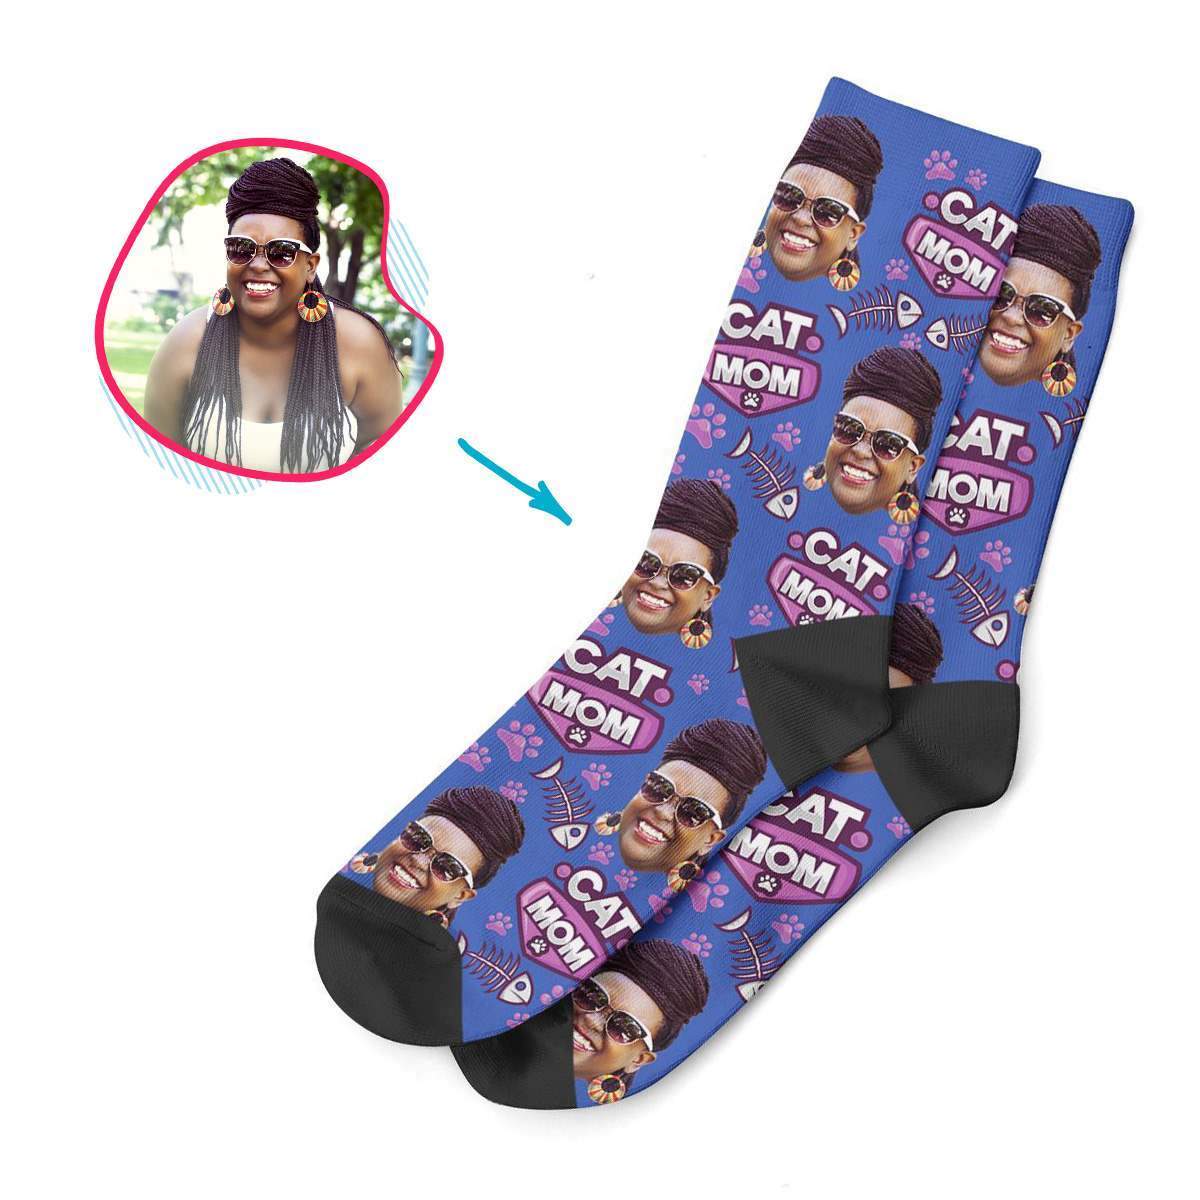 darkblue Cat Mom socks personalized with photo of face printed on them